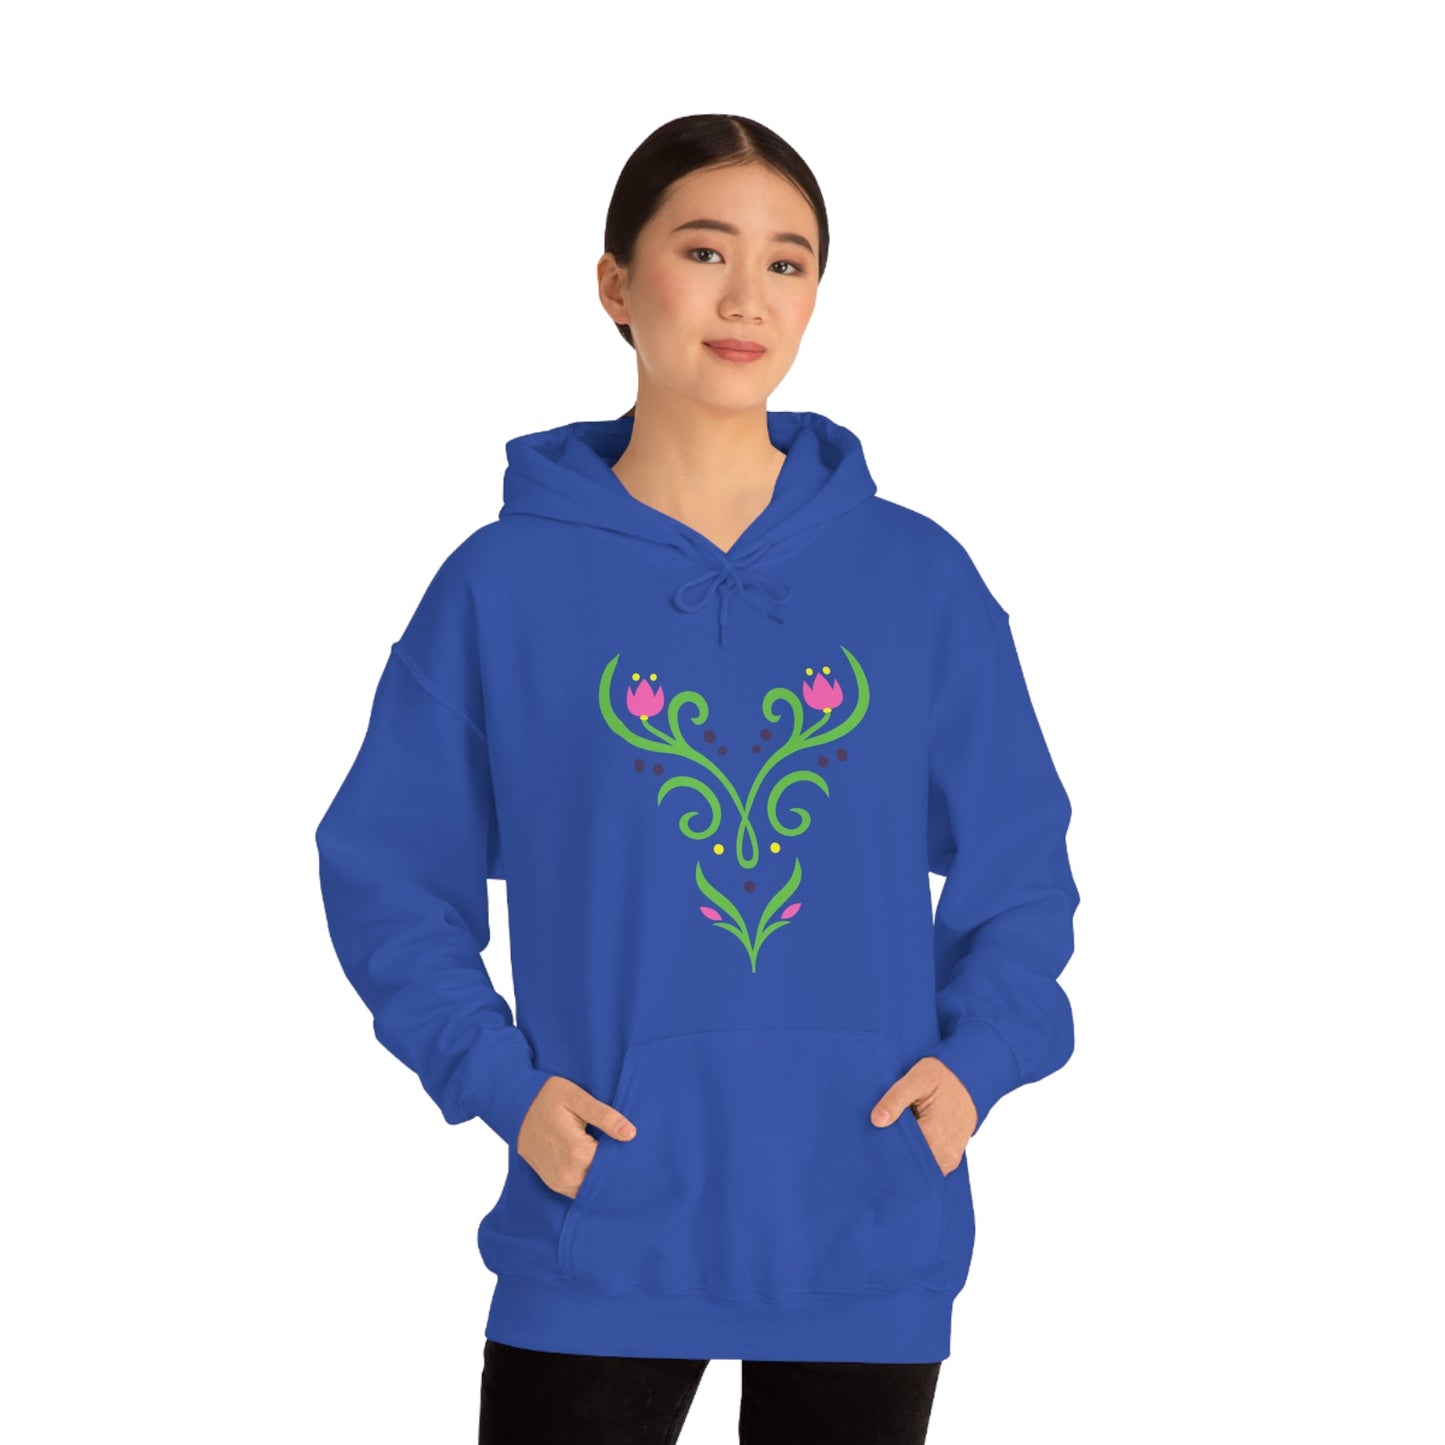 Unisex Heavy Blend Hooded Sweatshirt DTGhappiness is addictiveAdult T-ShirtLittle Lady Shay Boutique